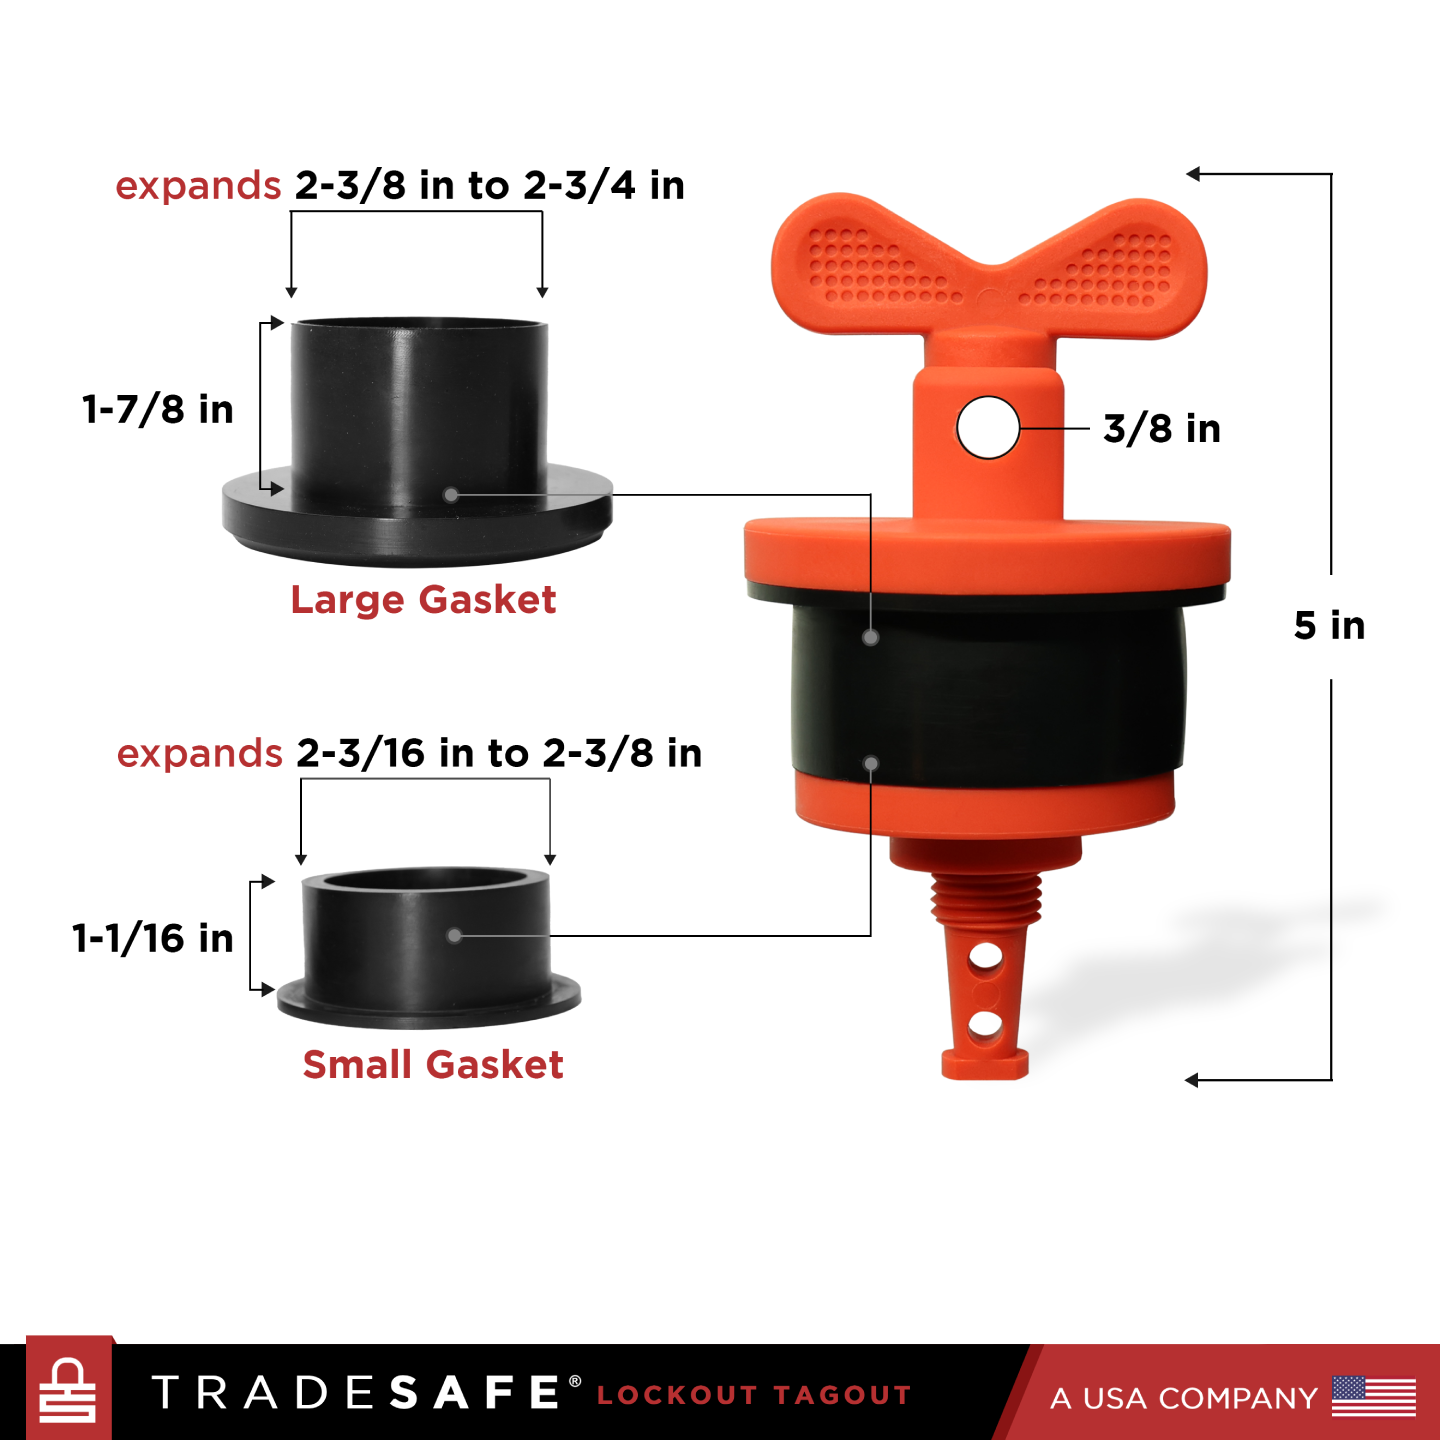 nylon drum lock dimensions: 3/8 in padlock hole, 2-3/8 in to 2-3/4 in large gasket, 2-3/16 in to 2-3/8 in small gasket